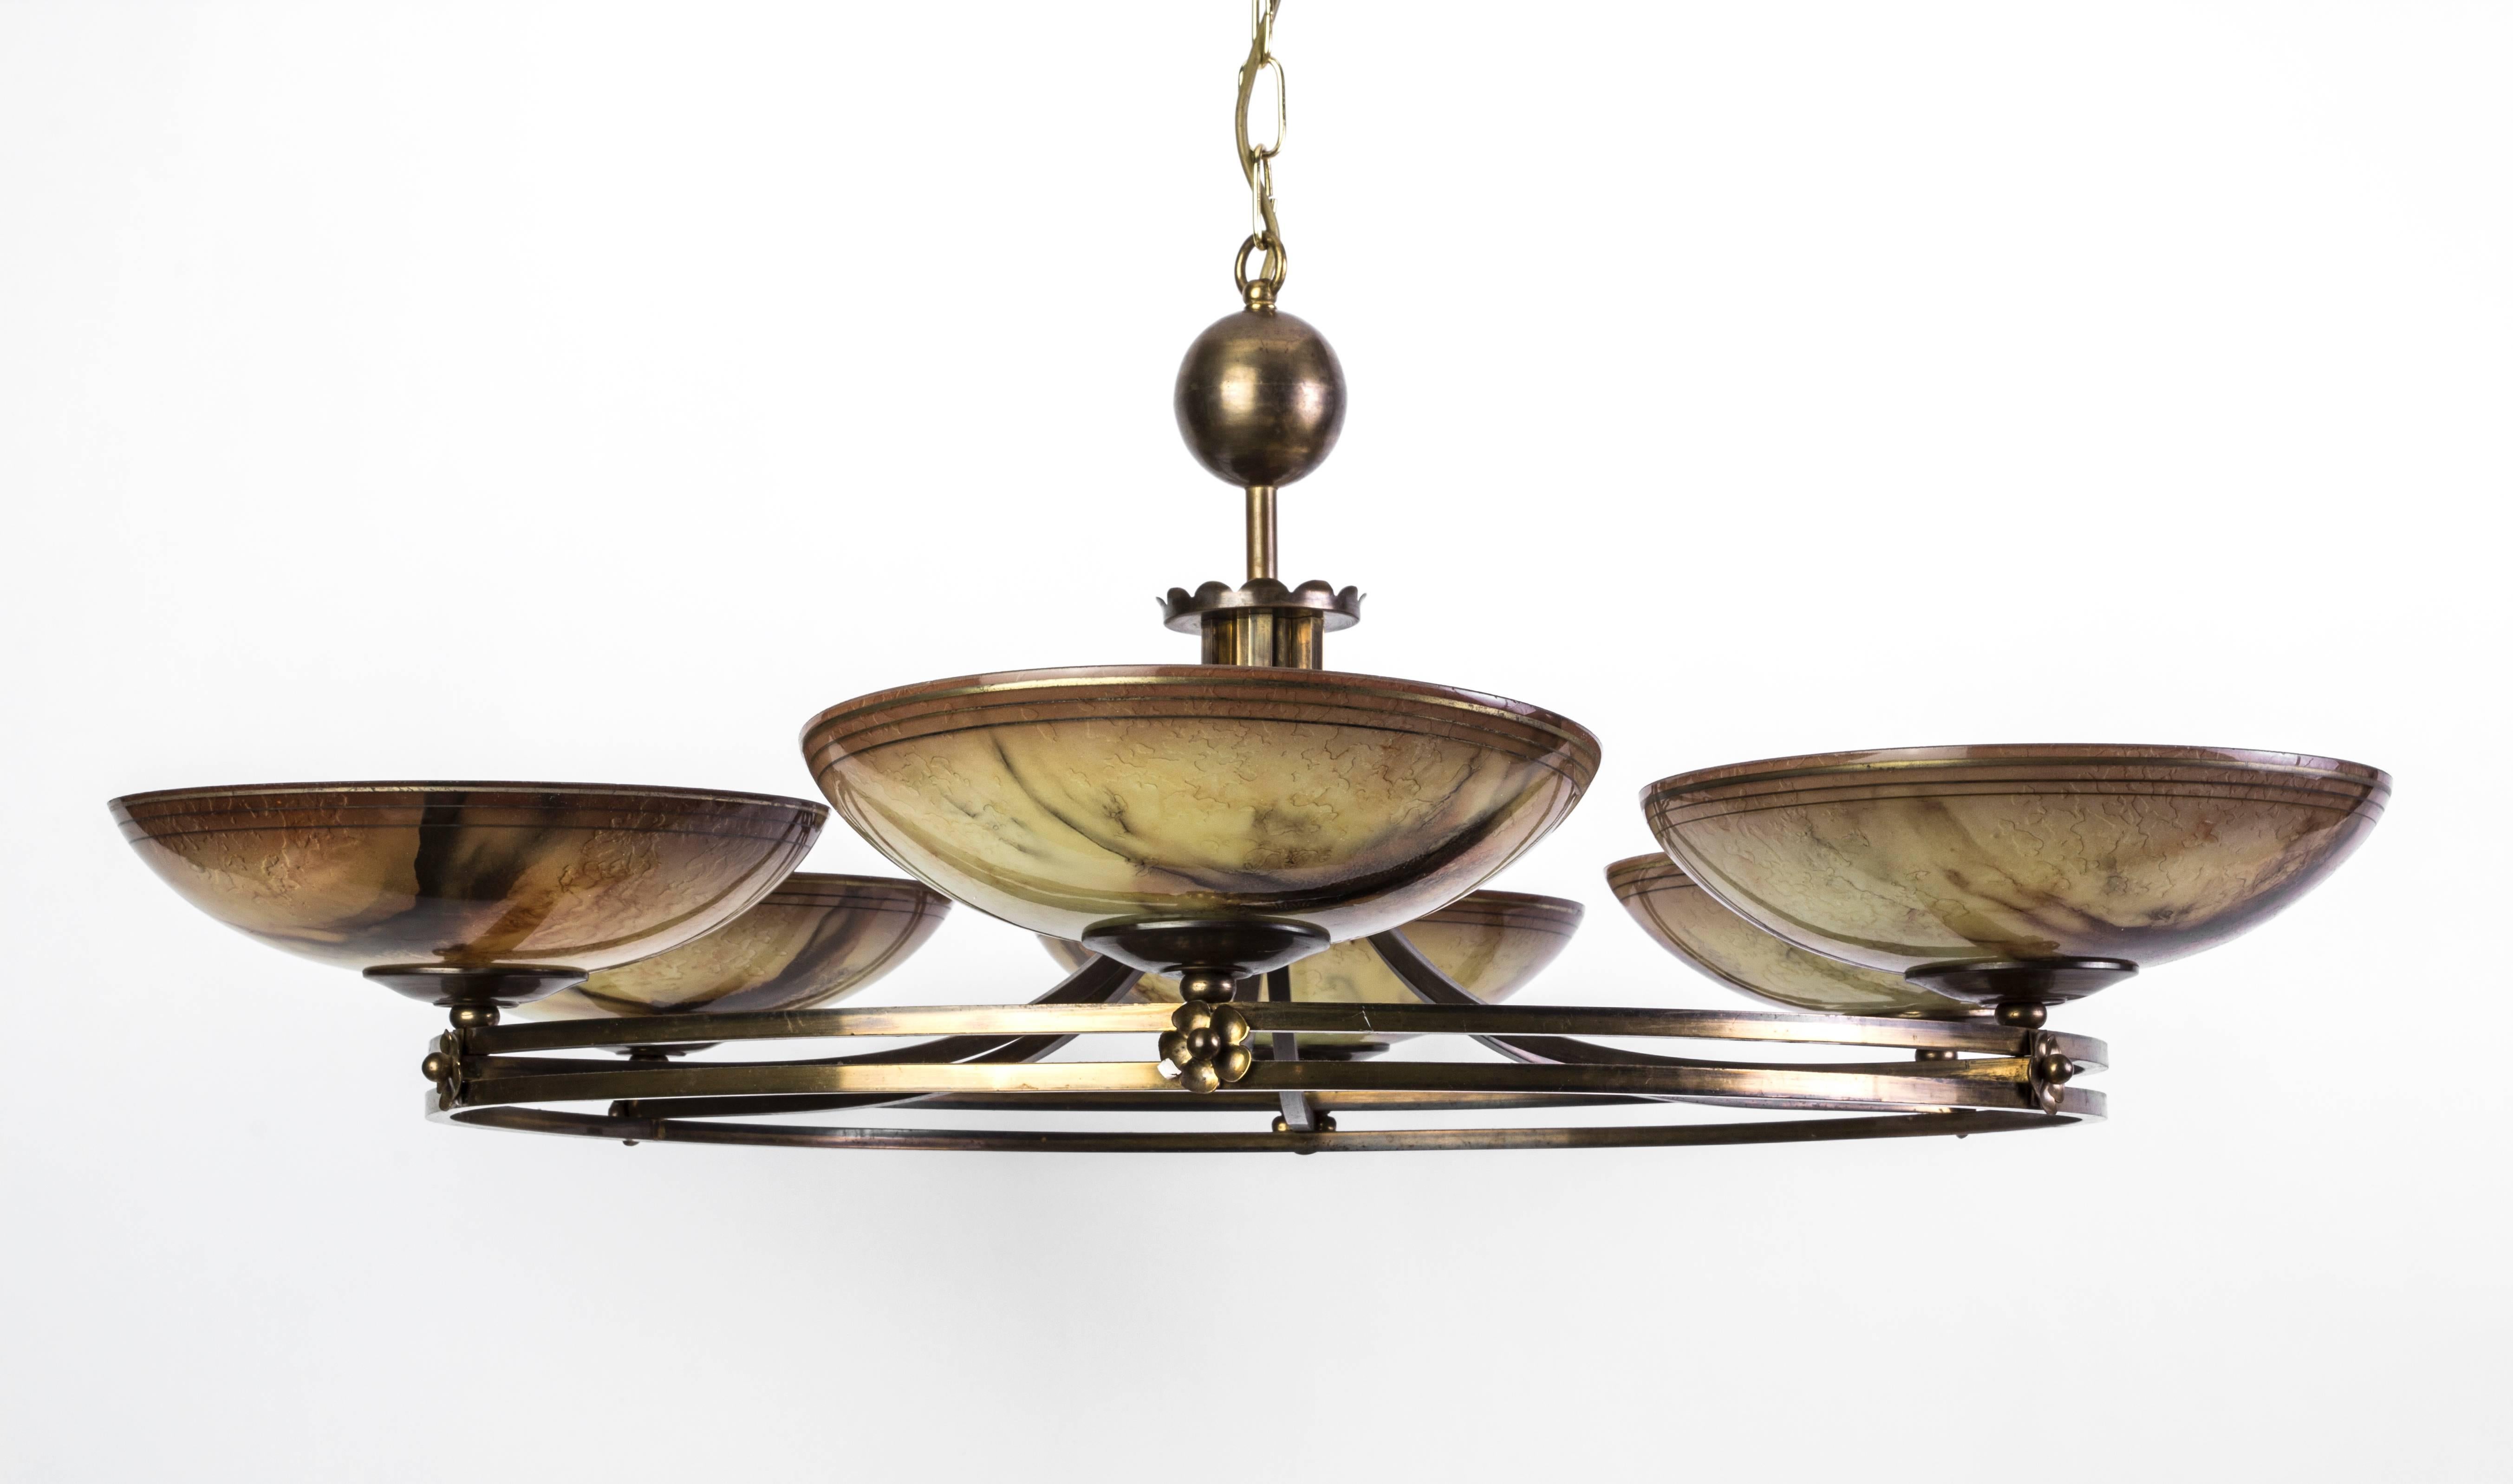 This unique German Art Deco chandelier was designed by Ikora. It features a gilded wrought iron frame with six glass shades in hues of umber and pearl.